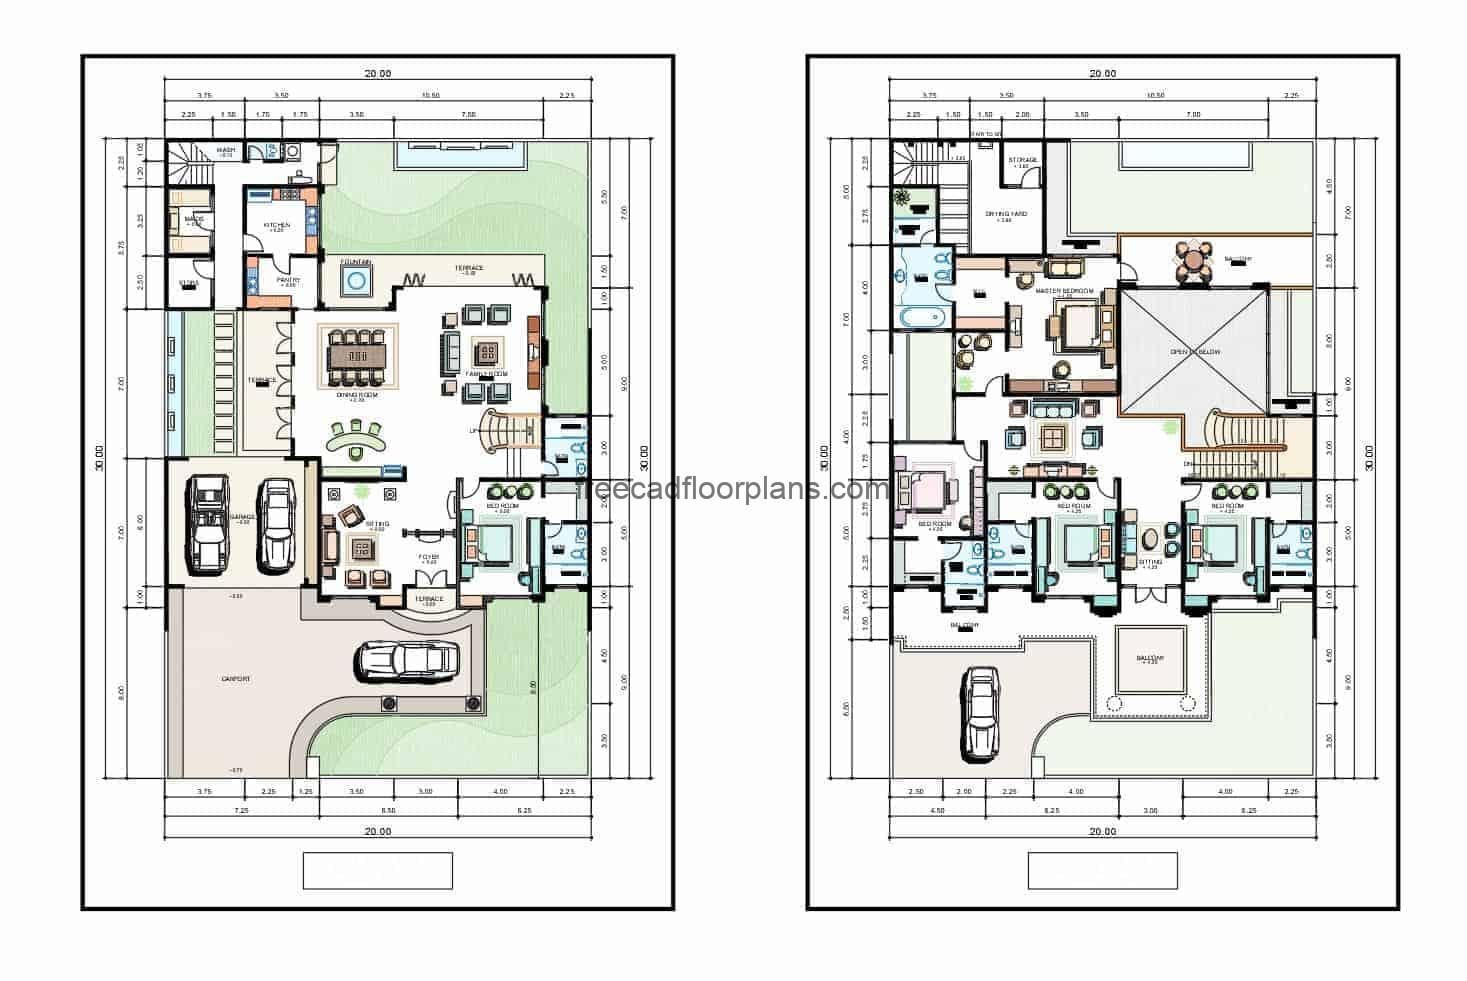 Two-storey residence drawing with four levels for free download in autocad DWG file